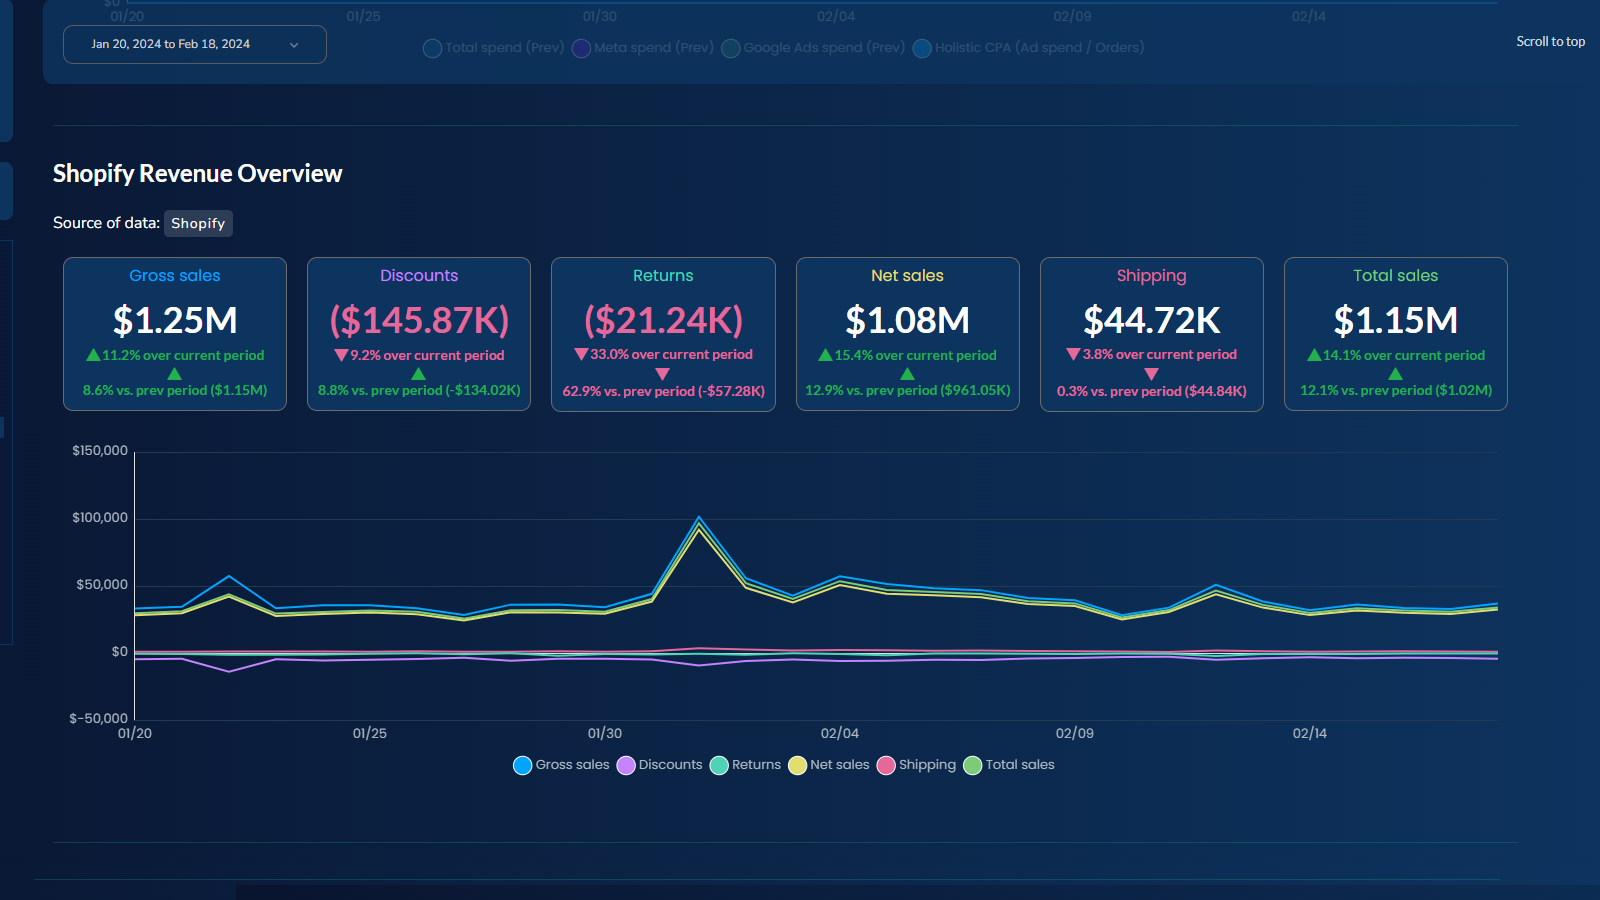 Shopify revenue overview on the Holistic Dashboard